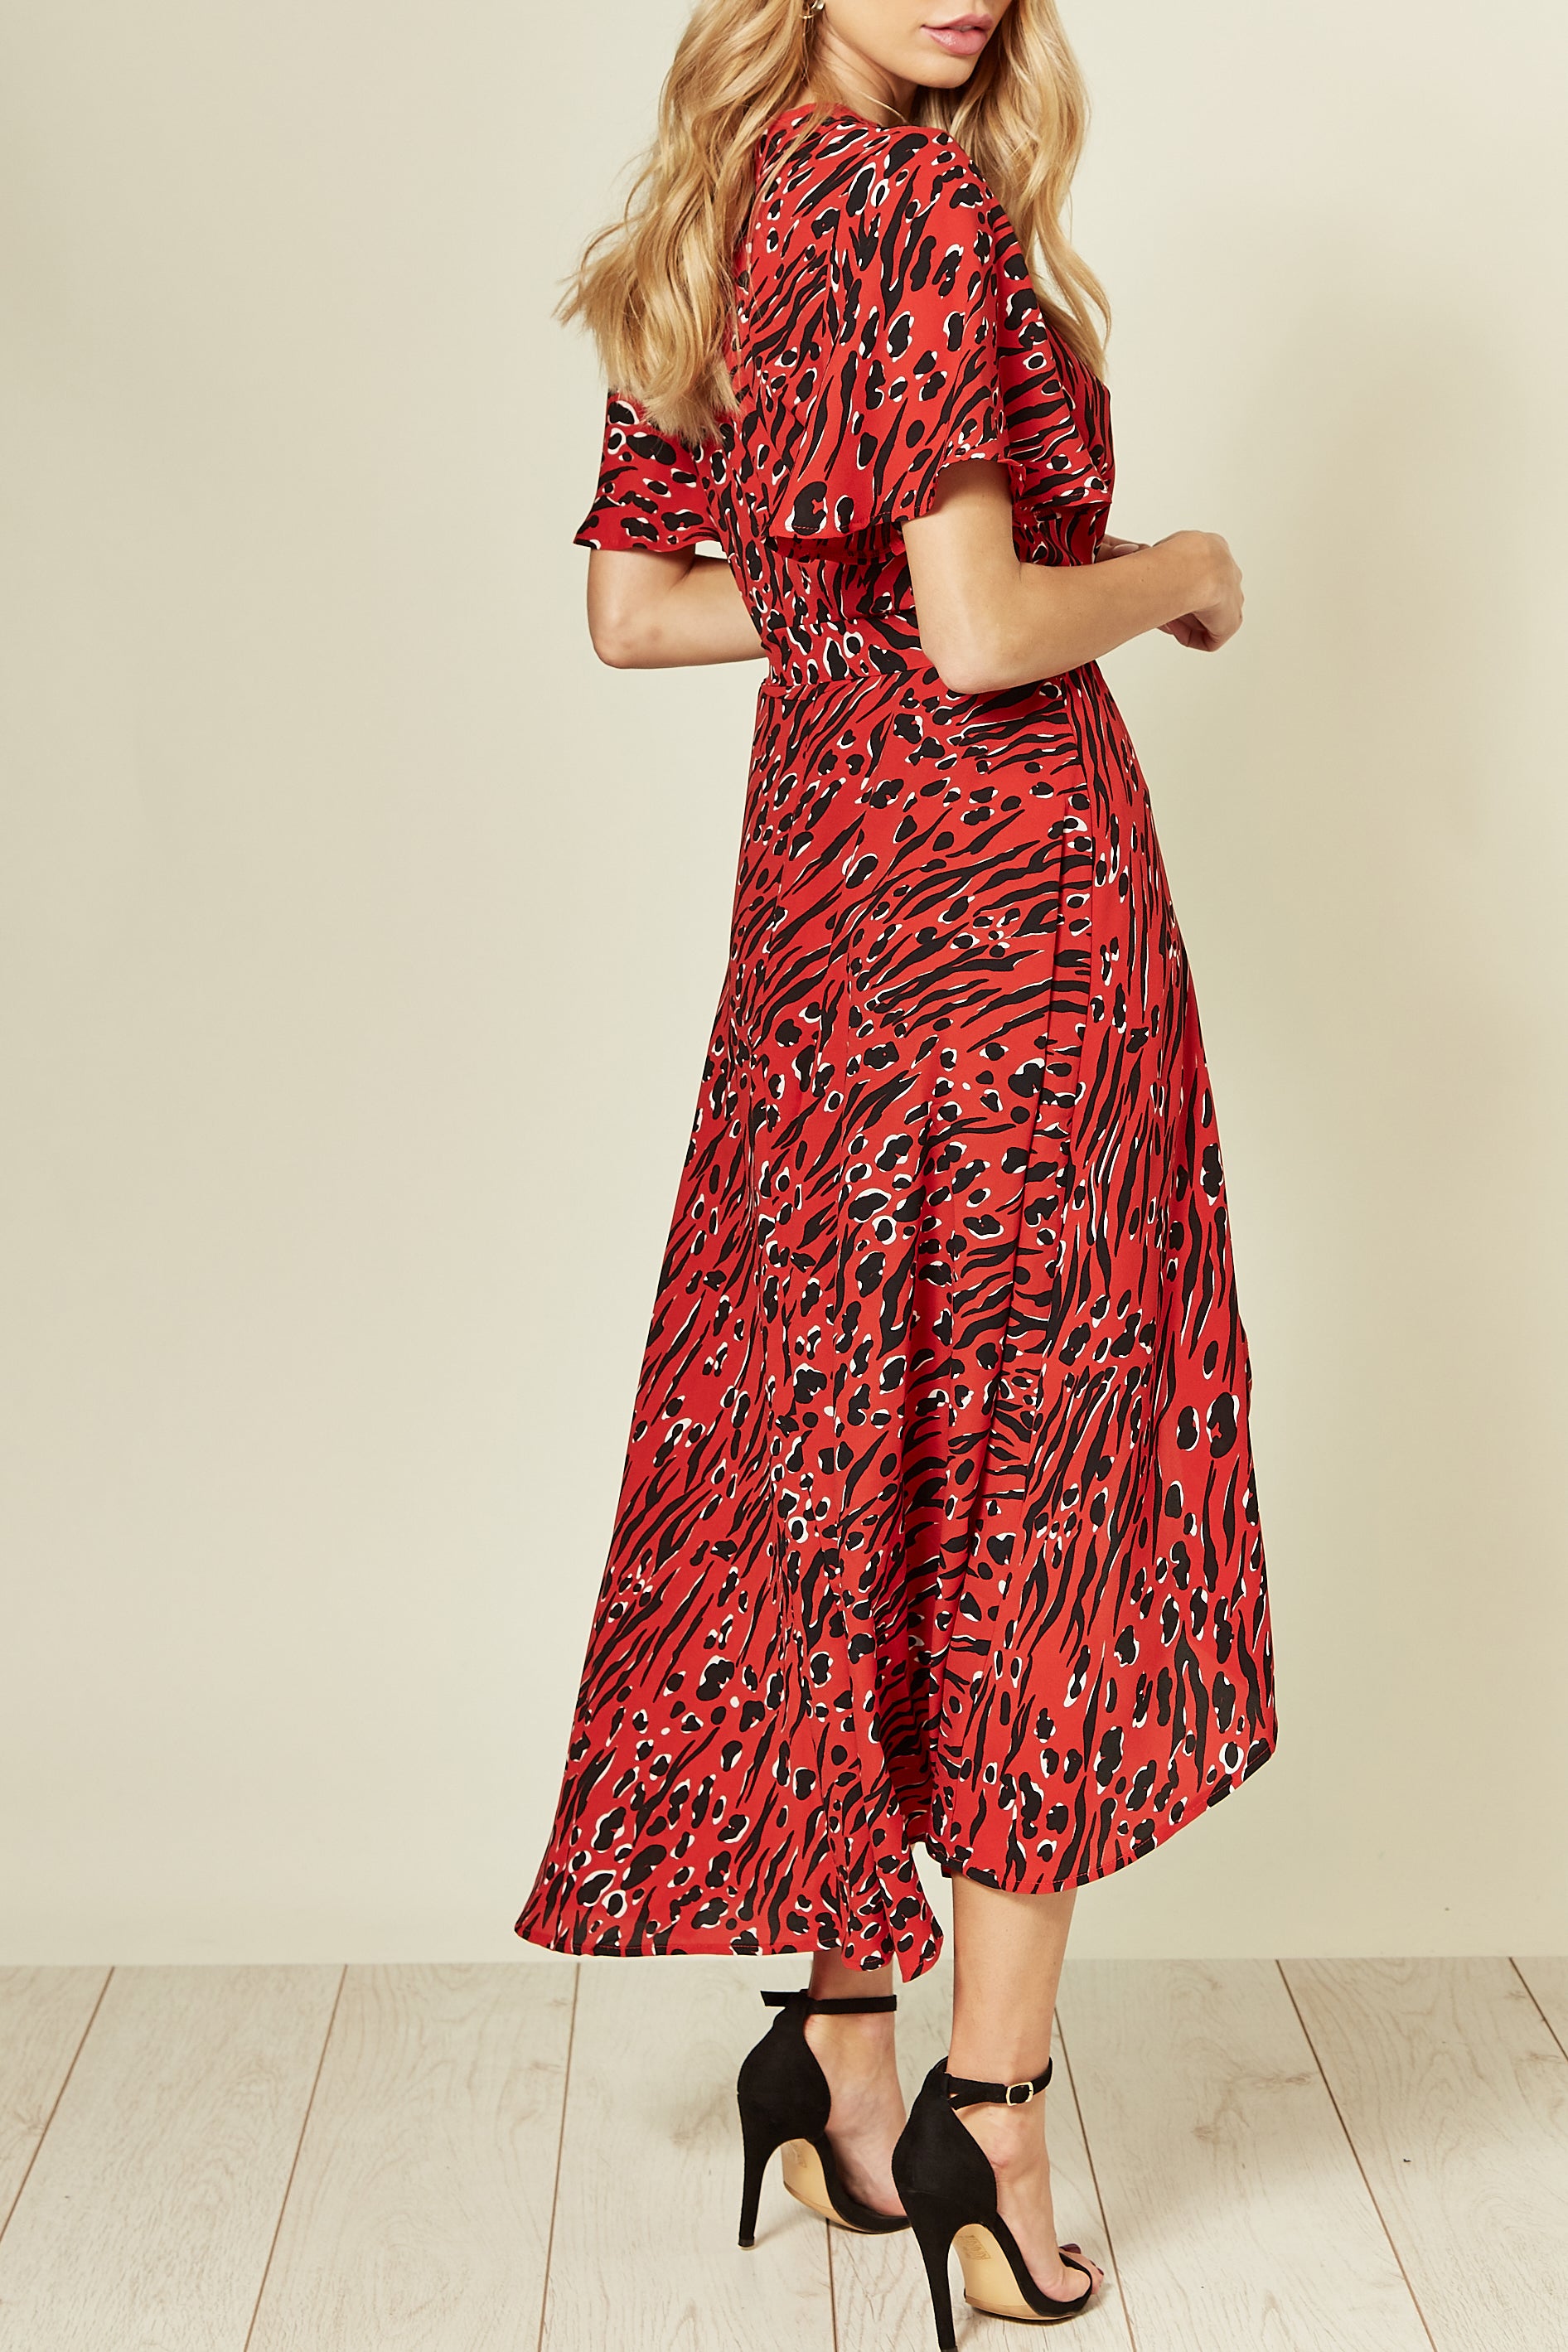 Cape Sleeve Wrap Dress in Red/Black Print